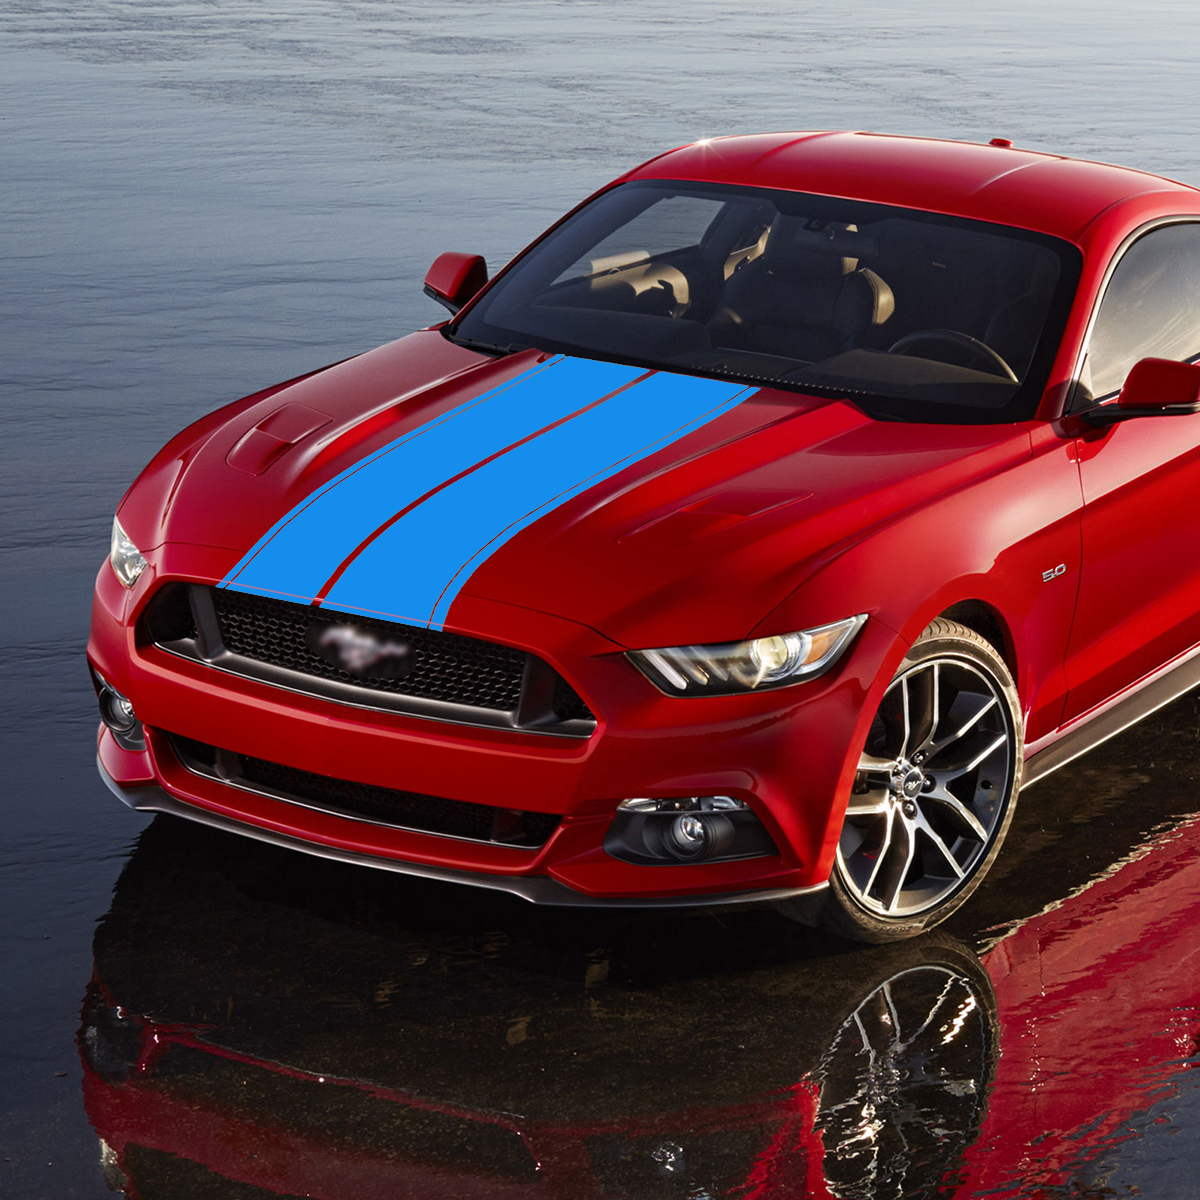 Hood Cover Roof Tail Rally Racing Stripe Decal PVC Body Sticker for Ford Mustang - Auto GoShop